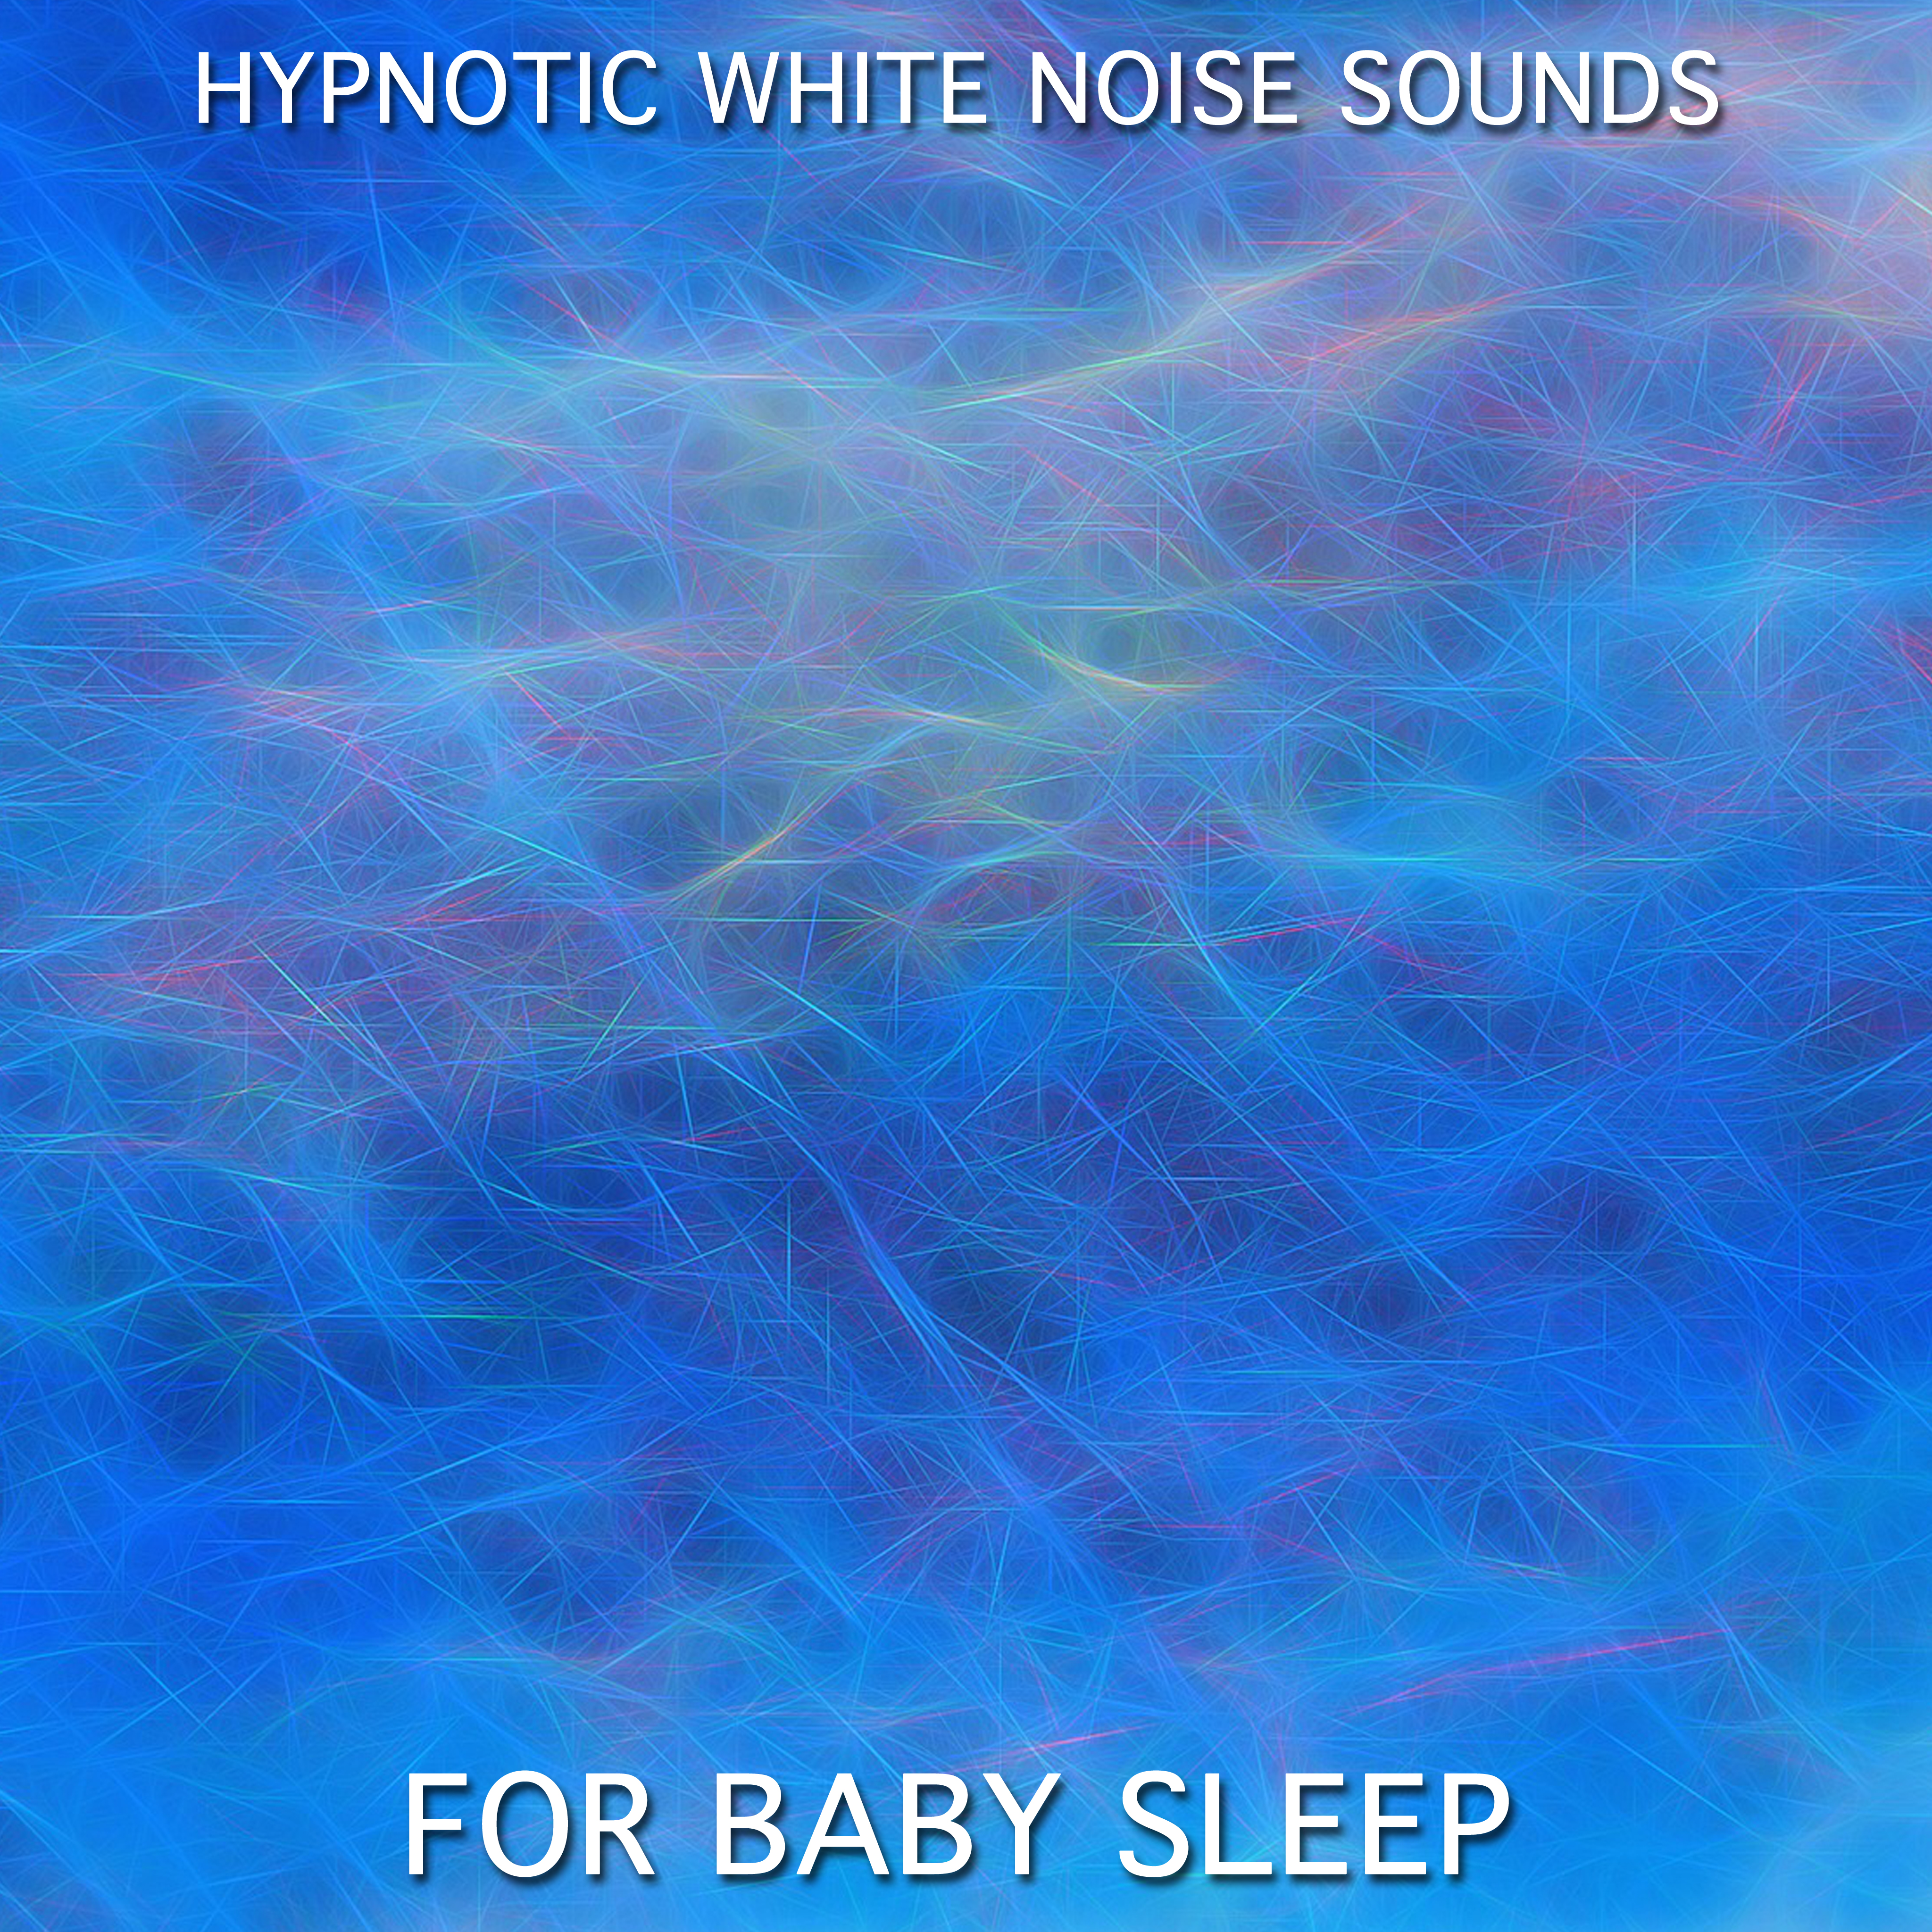 14 Hypnotic White Noise Sounds for Baby Sleep